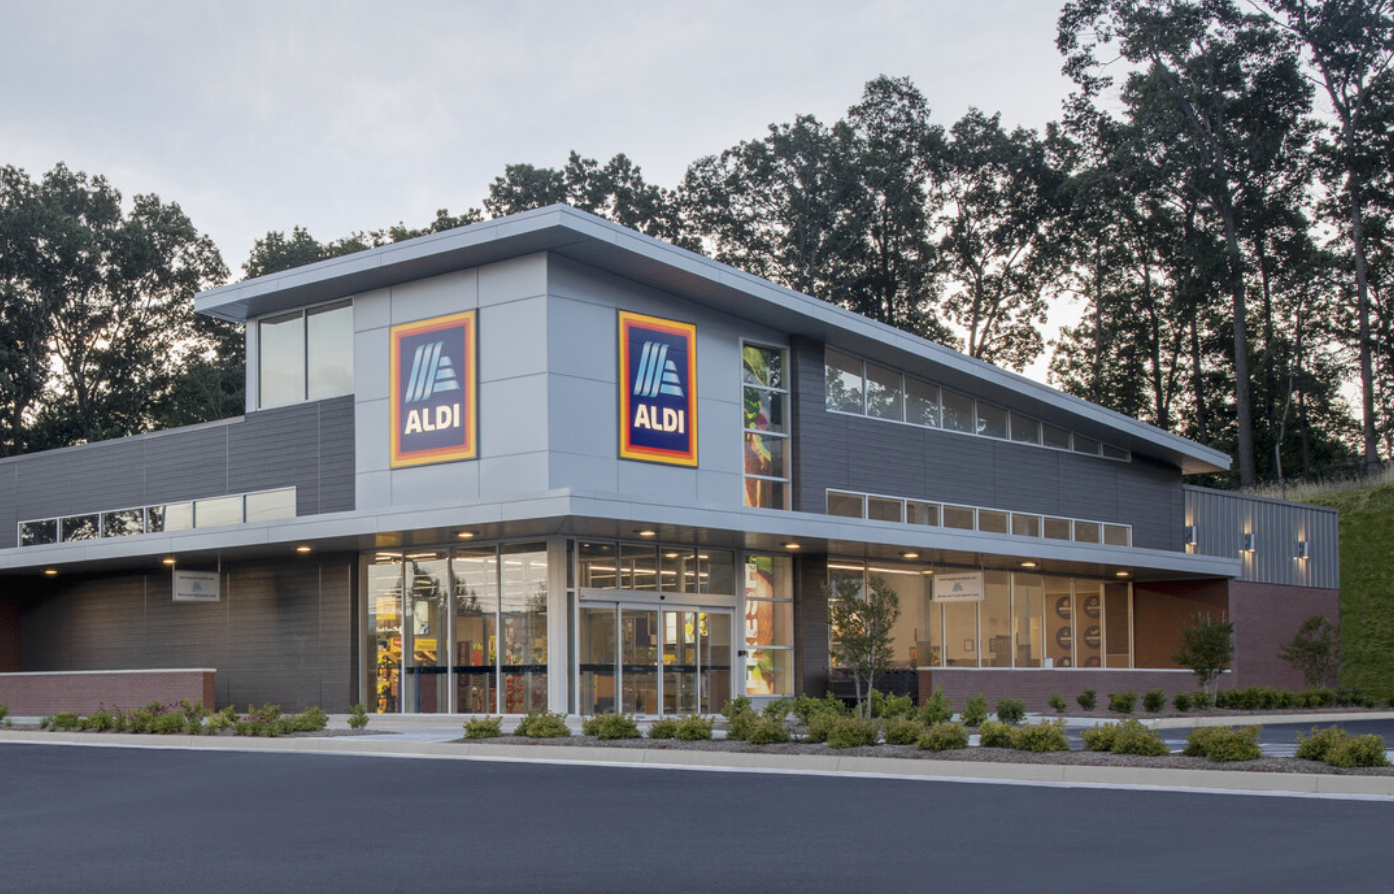 The exterior of an Aldi supermarket in the UK. 